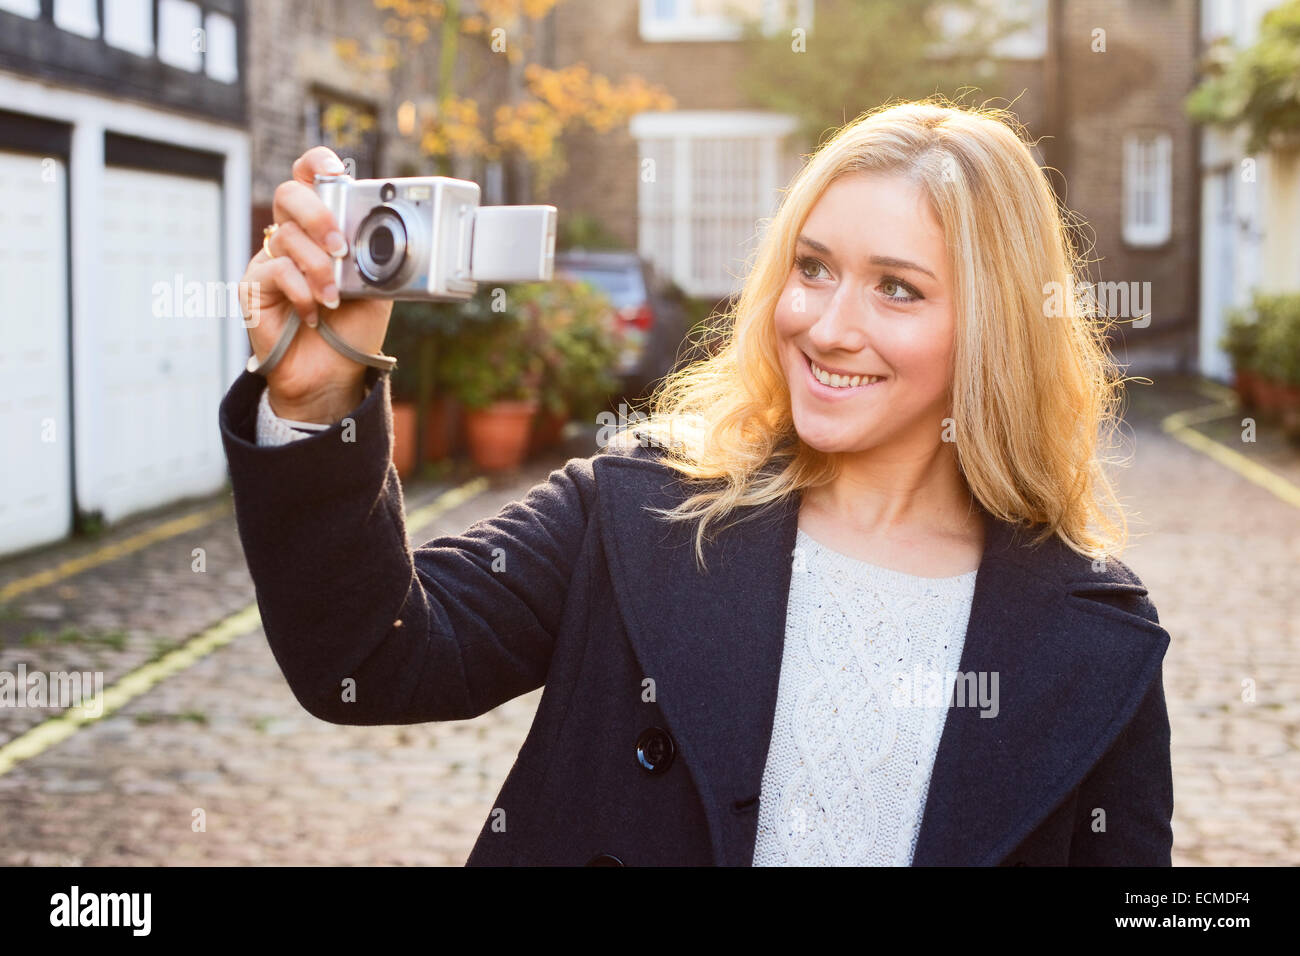 young woman taking a photo Stock Photo